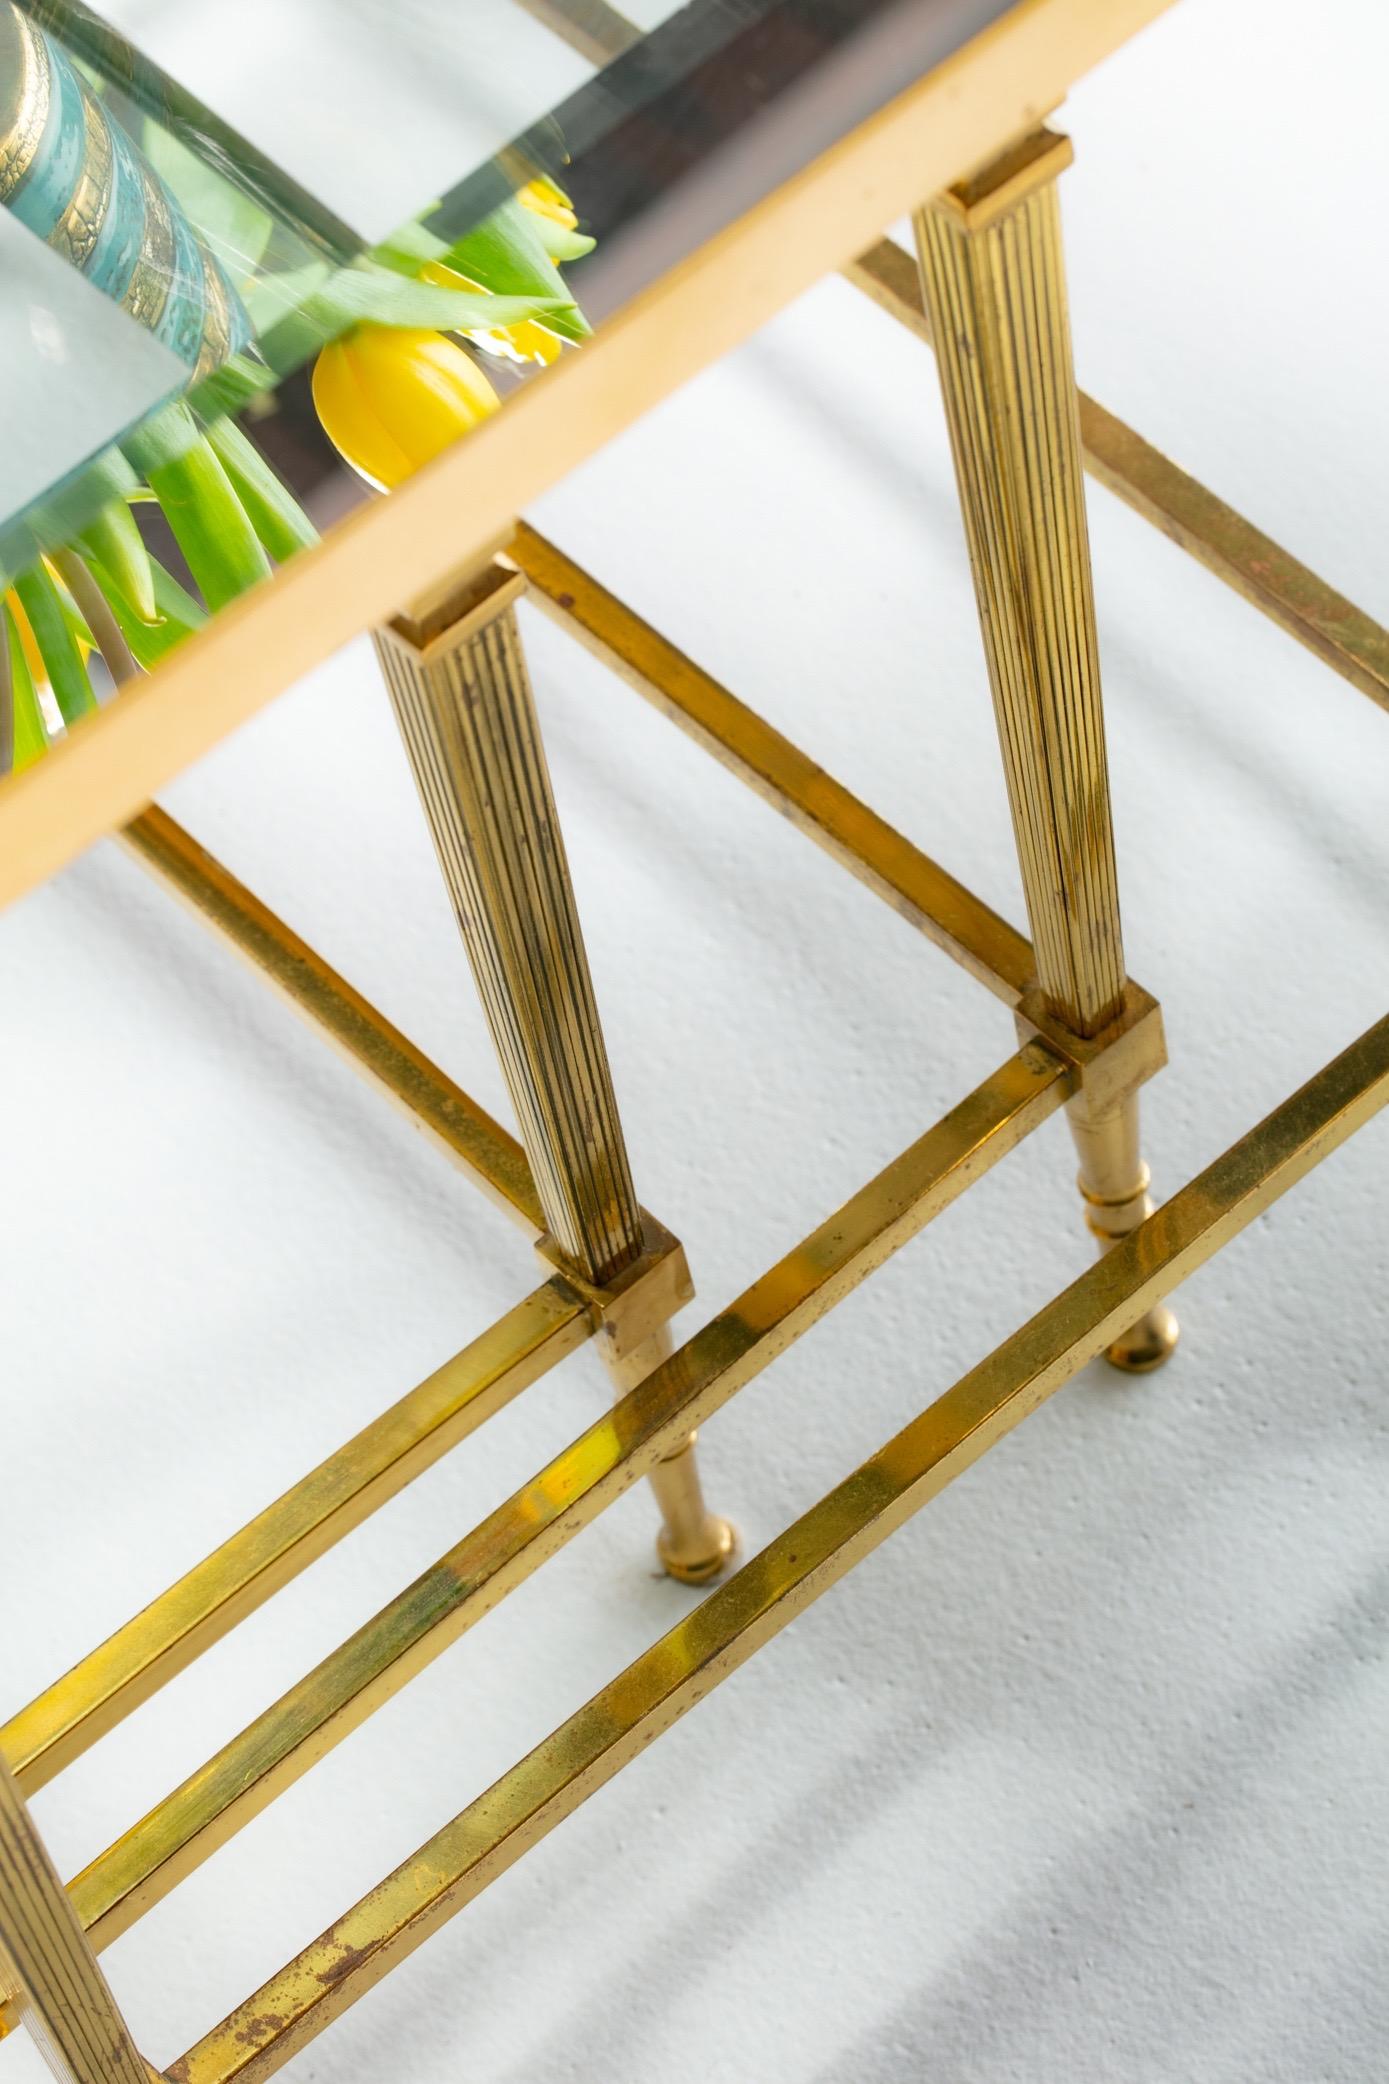 Mid-20th Century French Brass & Mirrored Glass Nesting Tables Attributed to Maison Baguès, c 1960